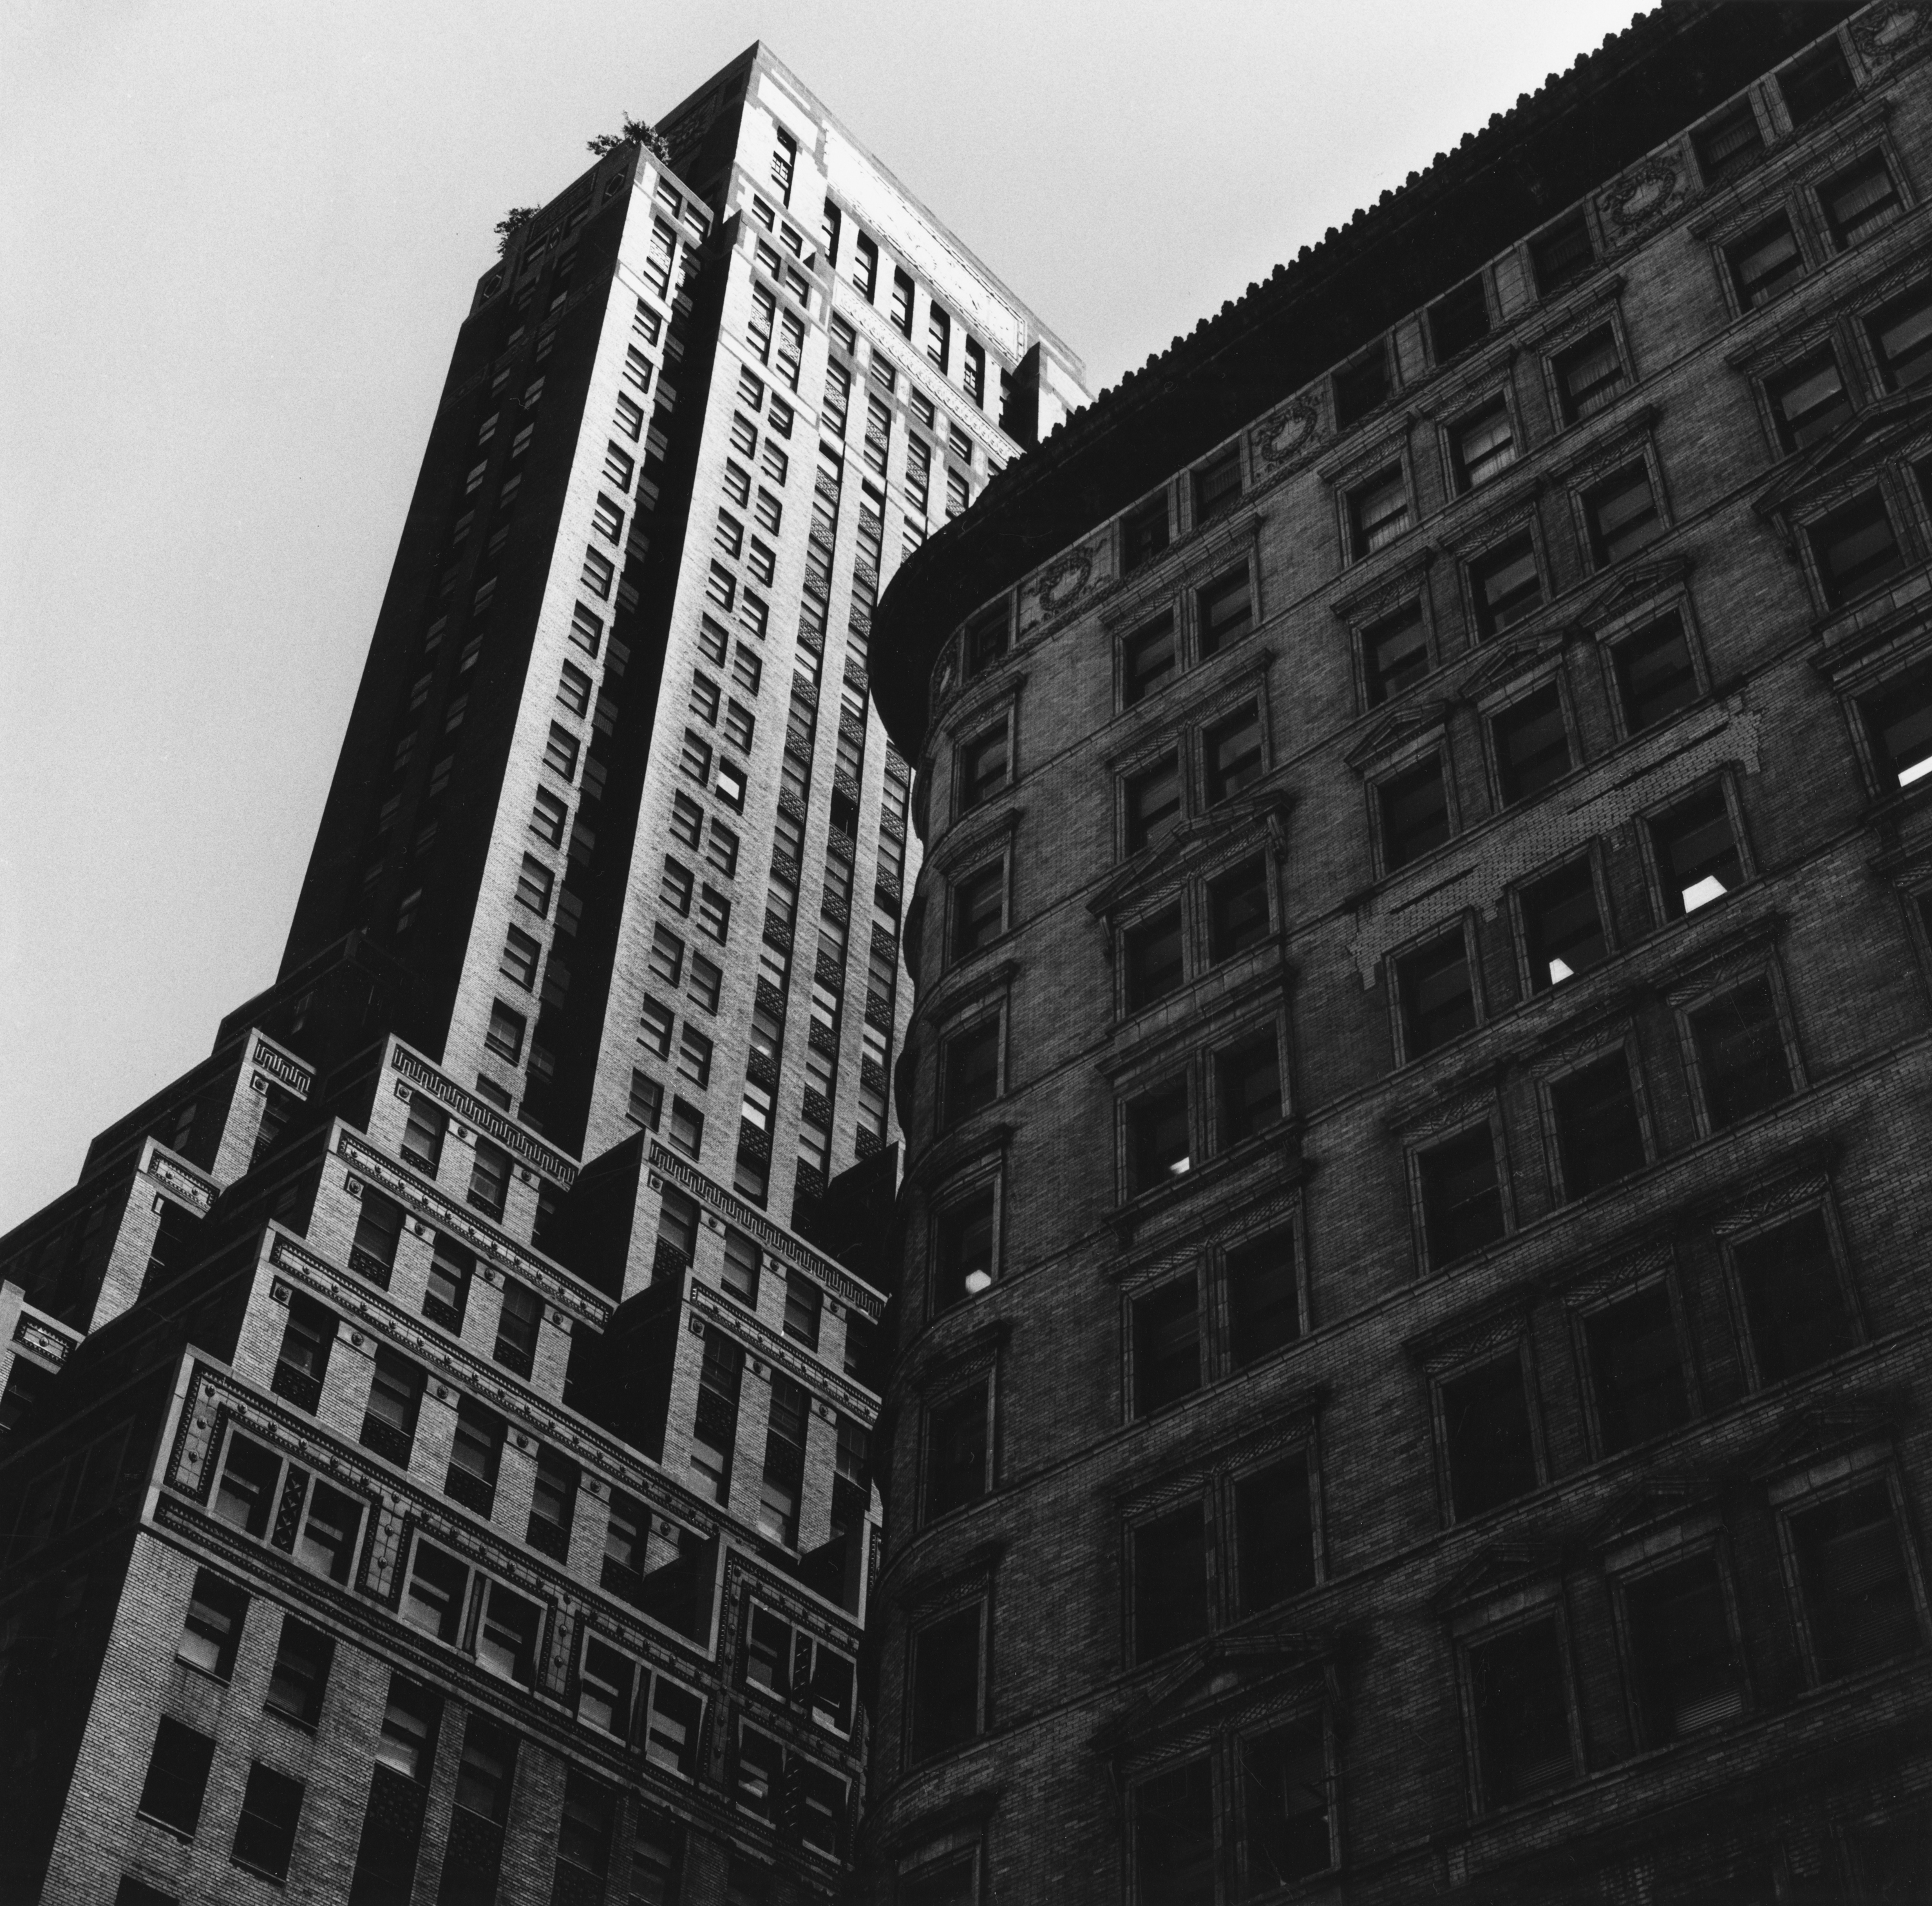 Black and white photograph of buildings in New York shot from the street